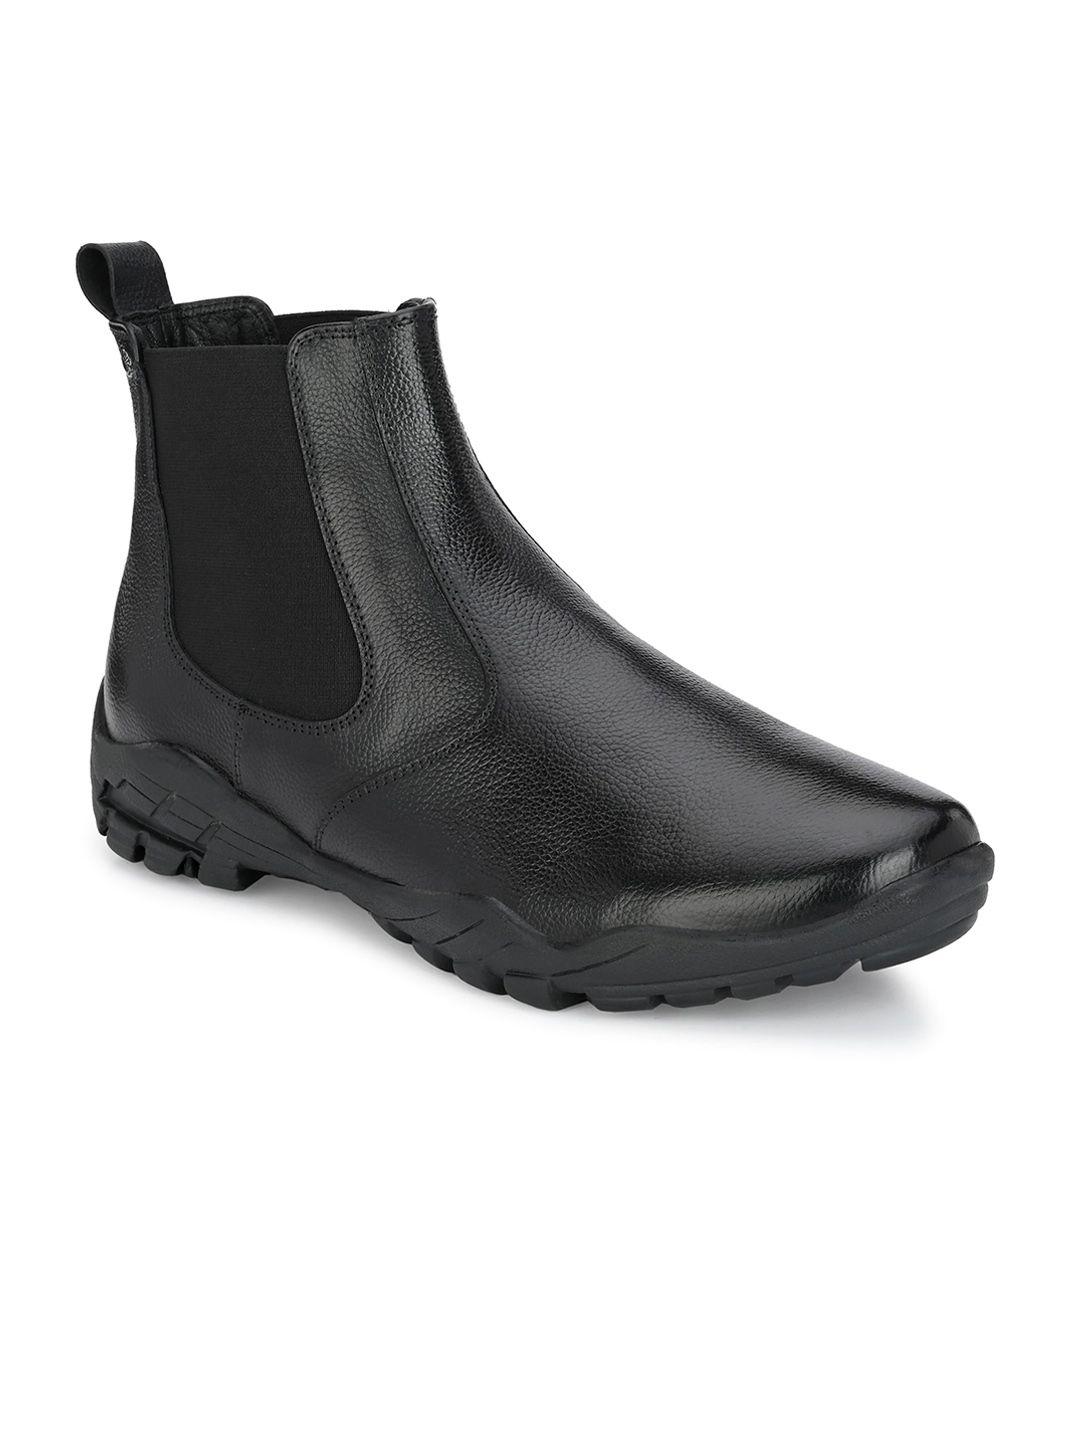 hitz men leather casual boots